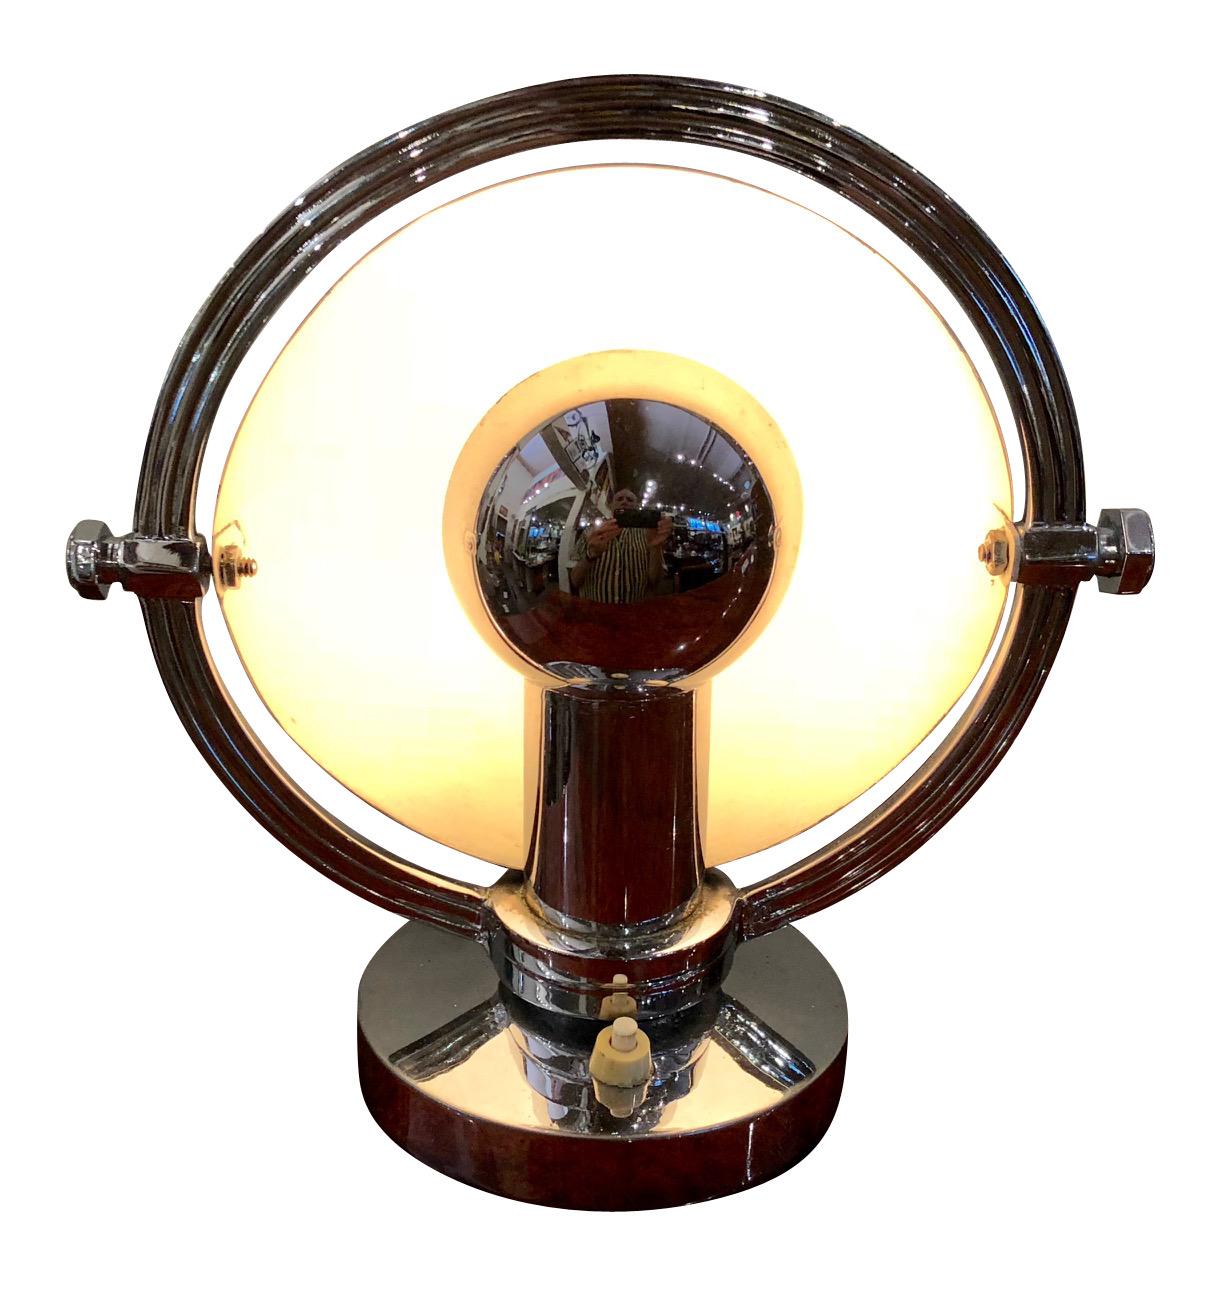 Rare Art Deco industrial light. Half rounded metal top that can be used in multiple positions. Acquired in Argentina but in the style of some of great looking designs by American industrial designers like Walter Dorwin Teague, Raymond Loewy, Henry